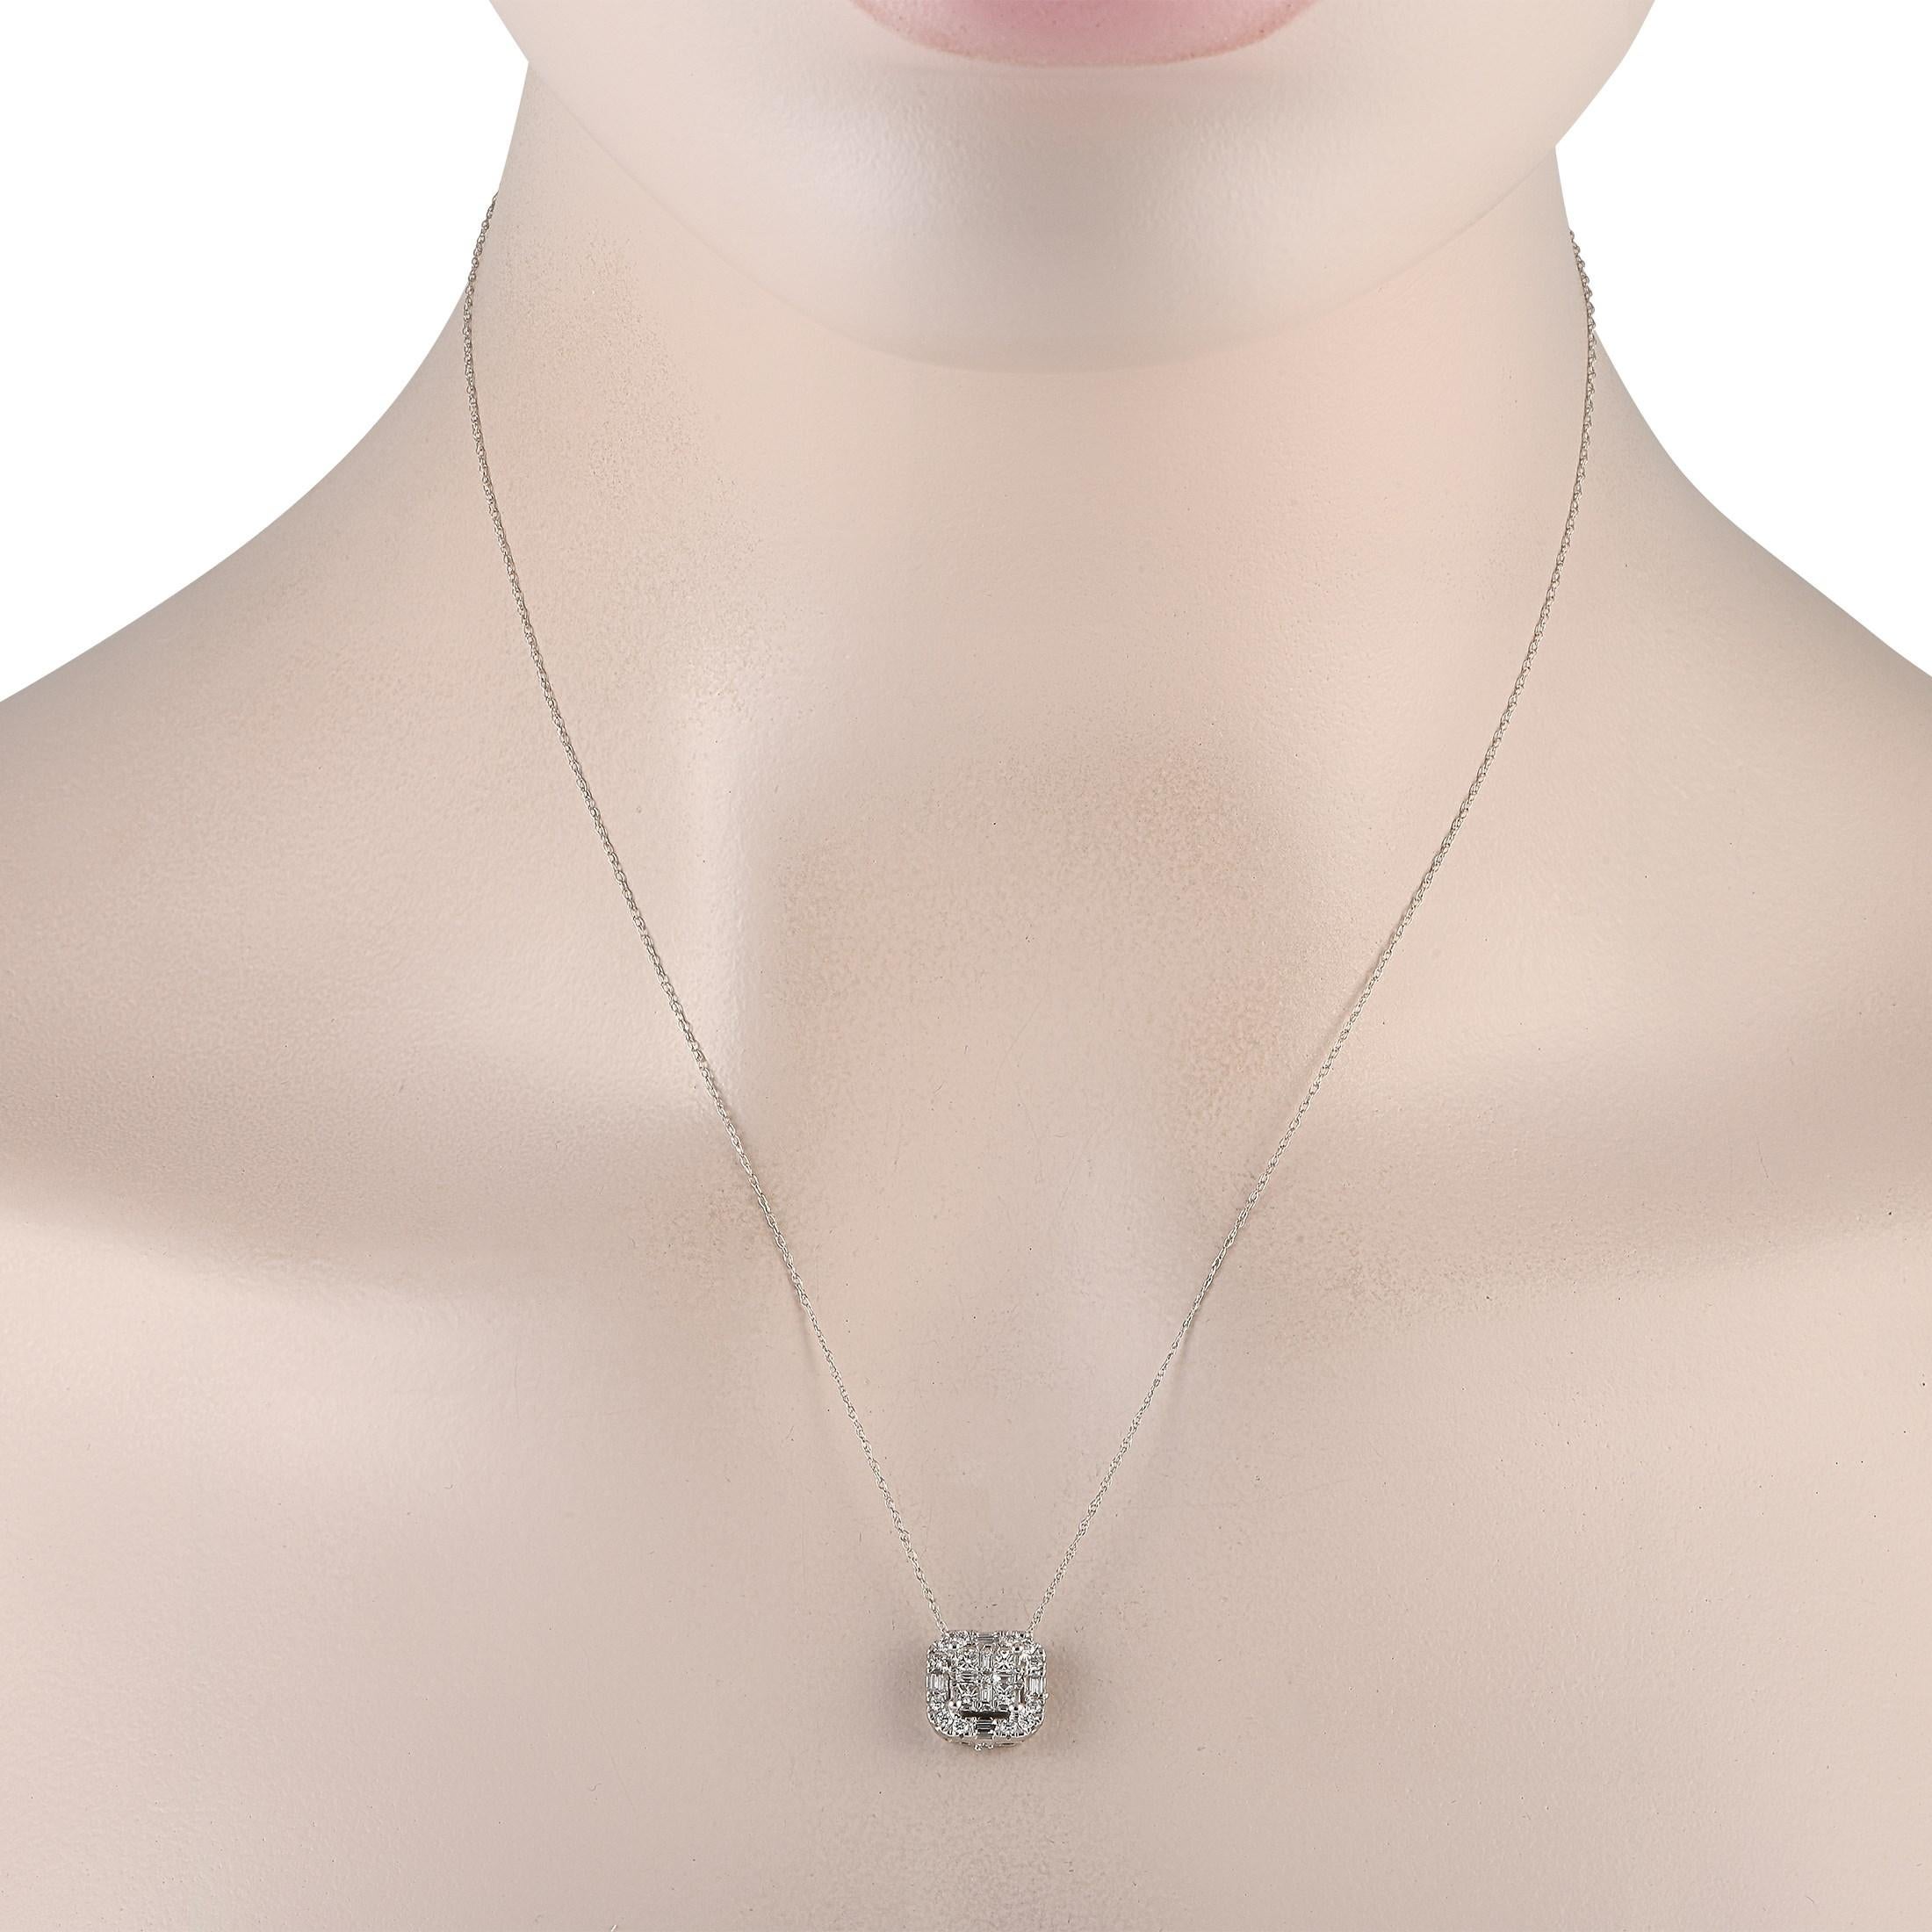 This simple but impactful diamond cluster necklace makes a radiant companion, day or night. It features an 18 chain in 14K white gold holding a 0.45-wide cushion-shaped diamond cluster pendant. Round and step-cut diamonds combine to bring twice as